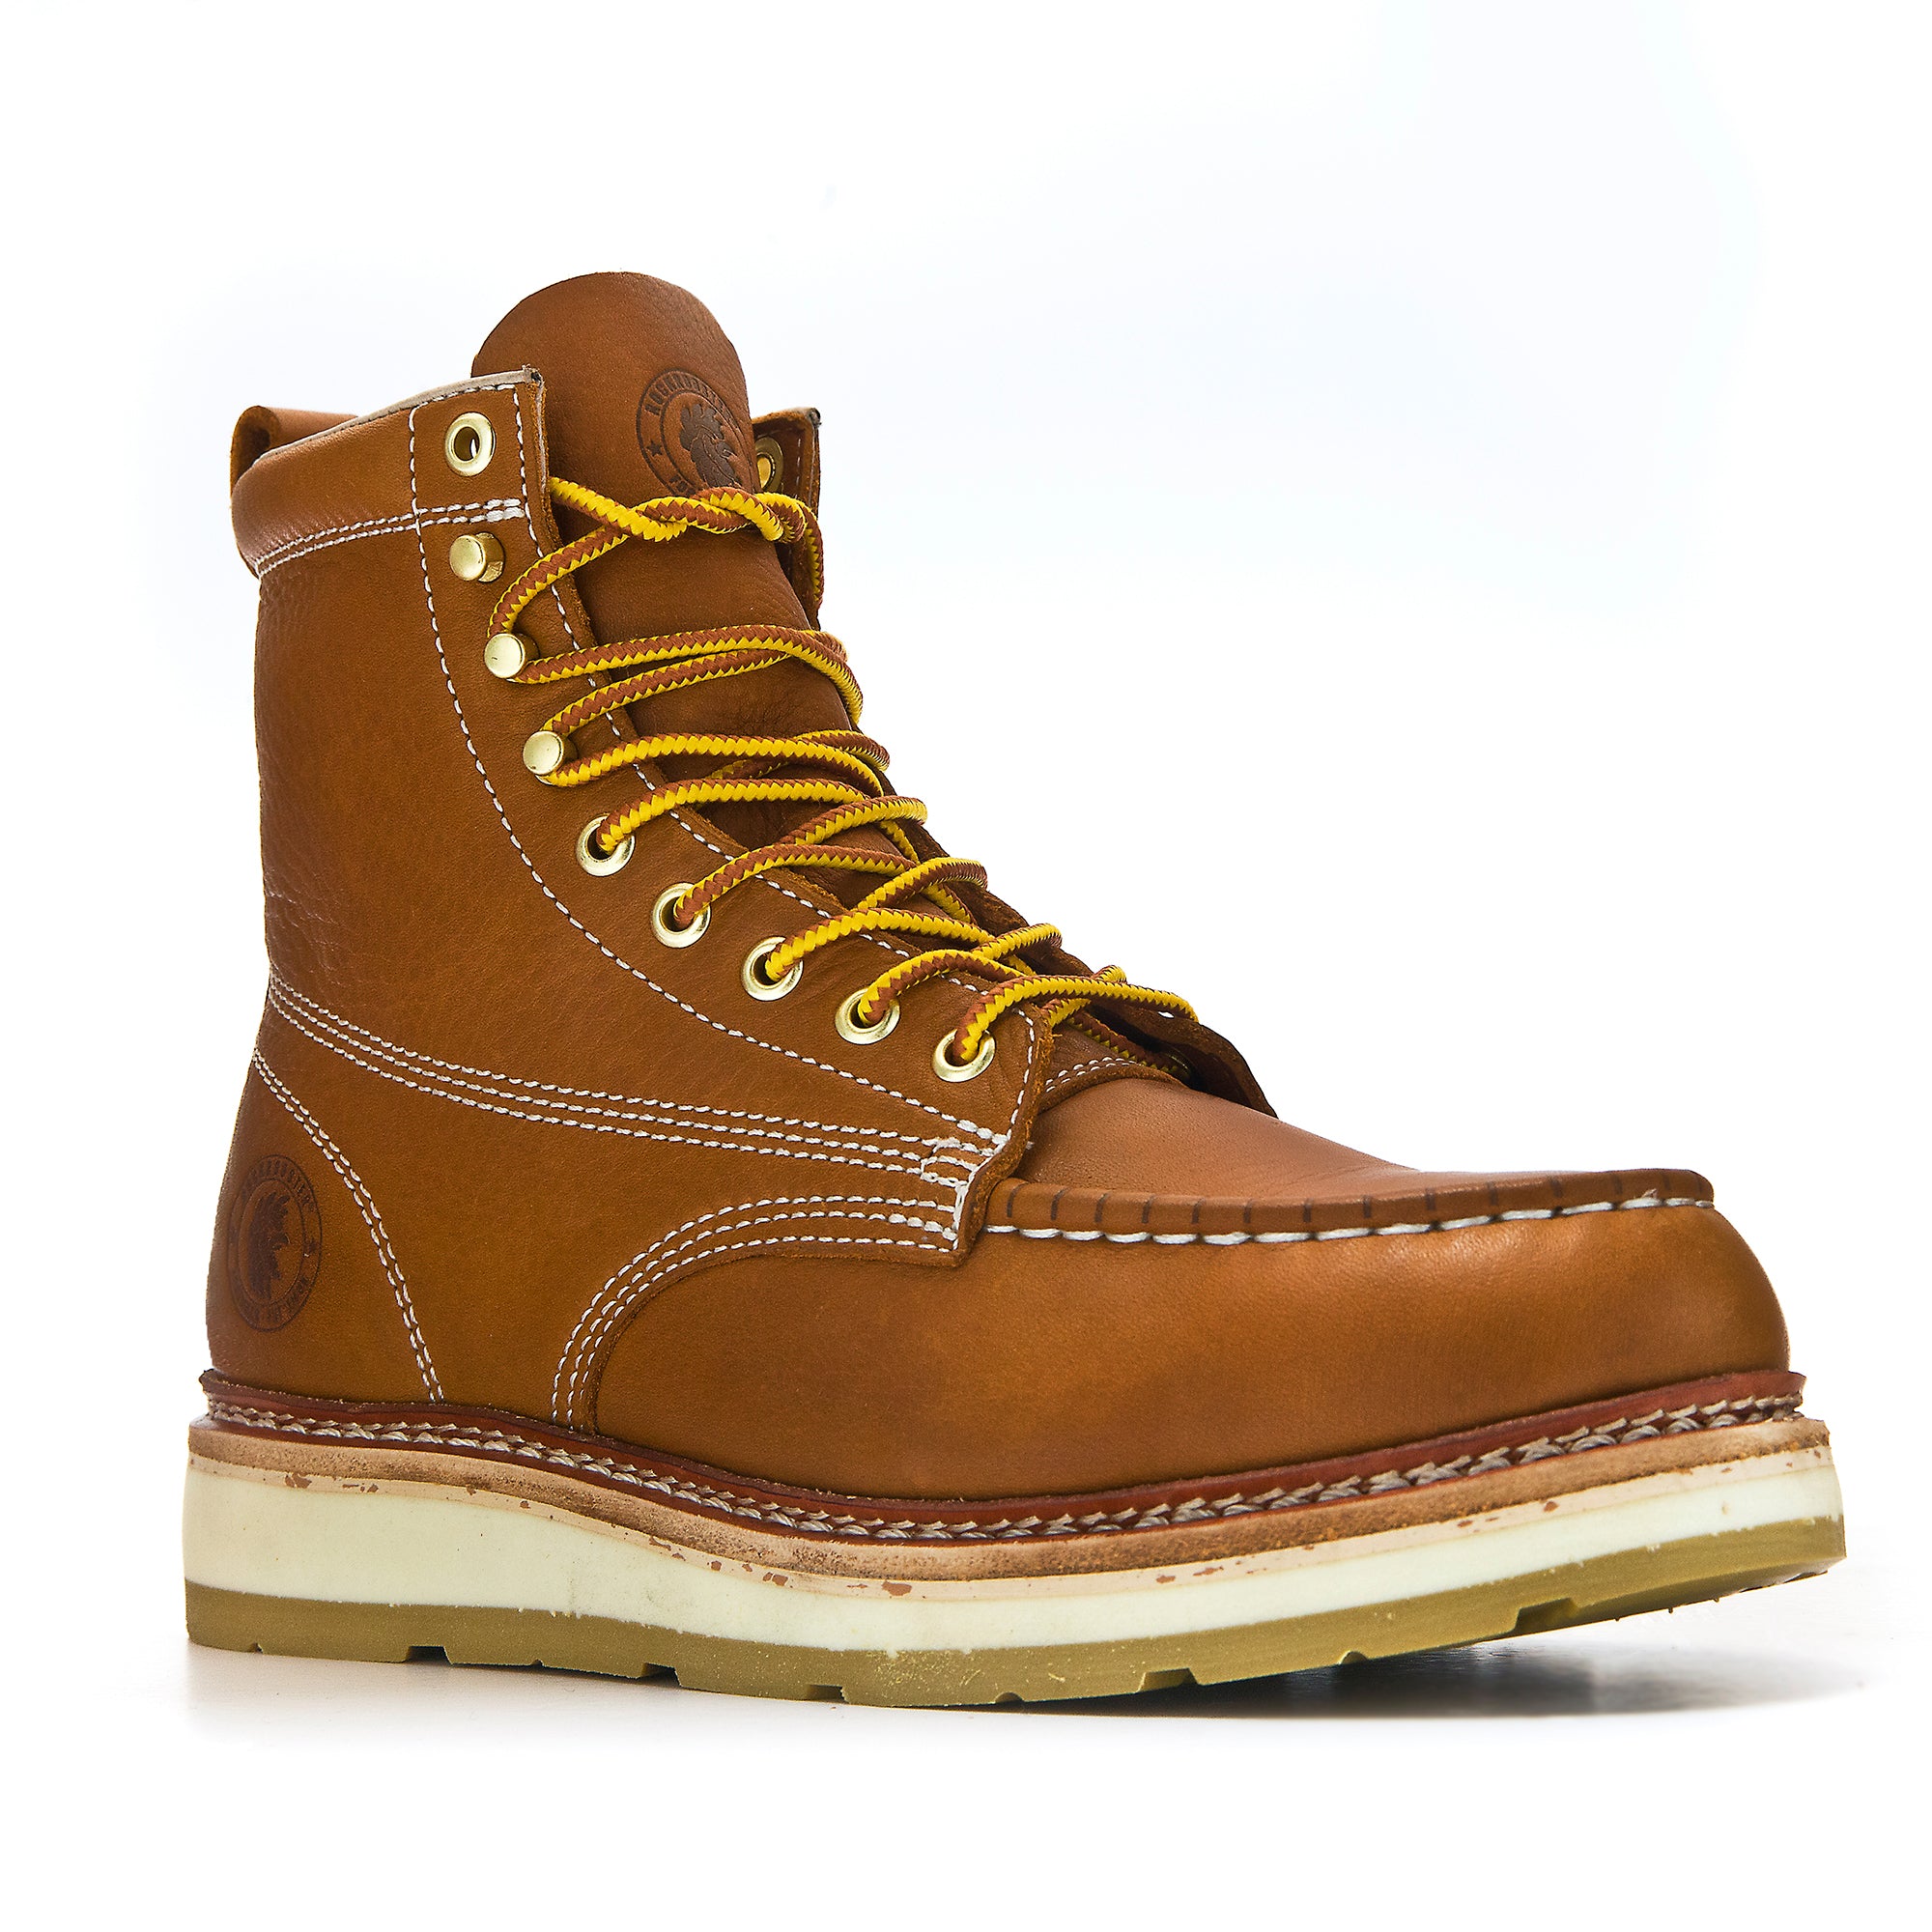 work boots water resistant